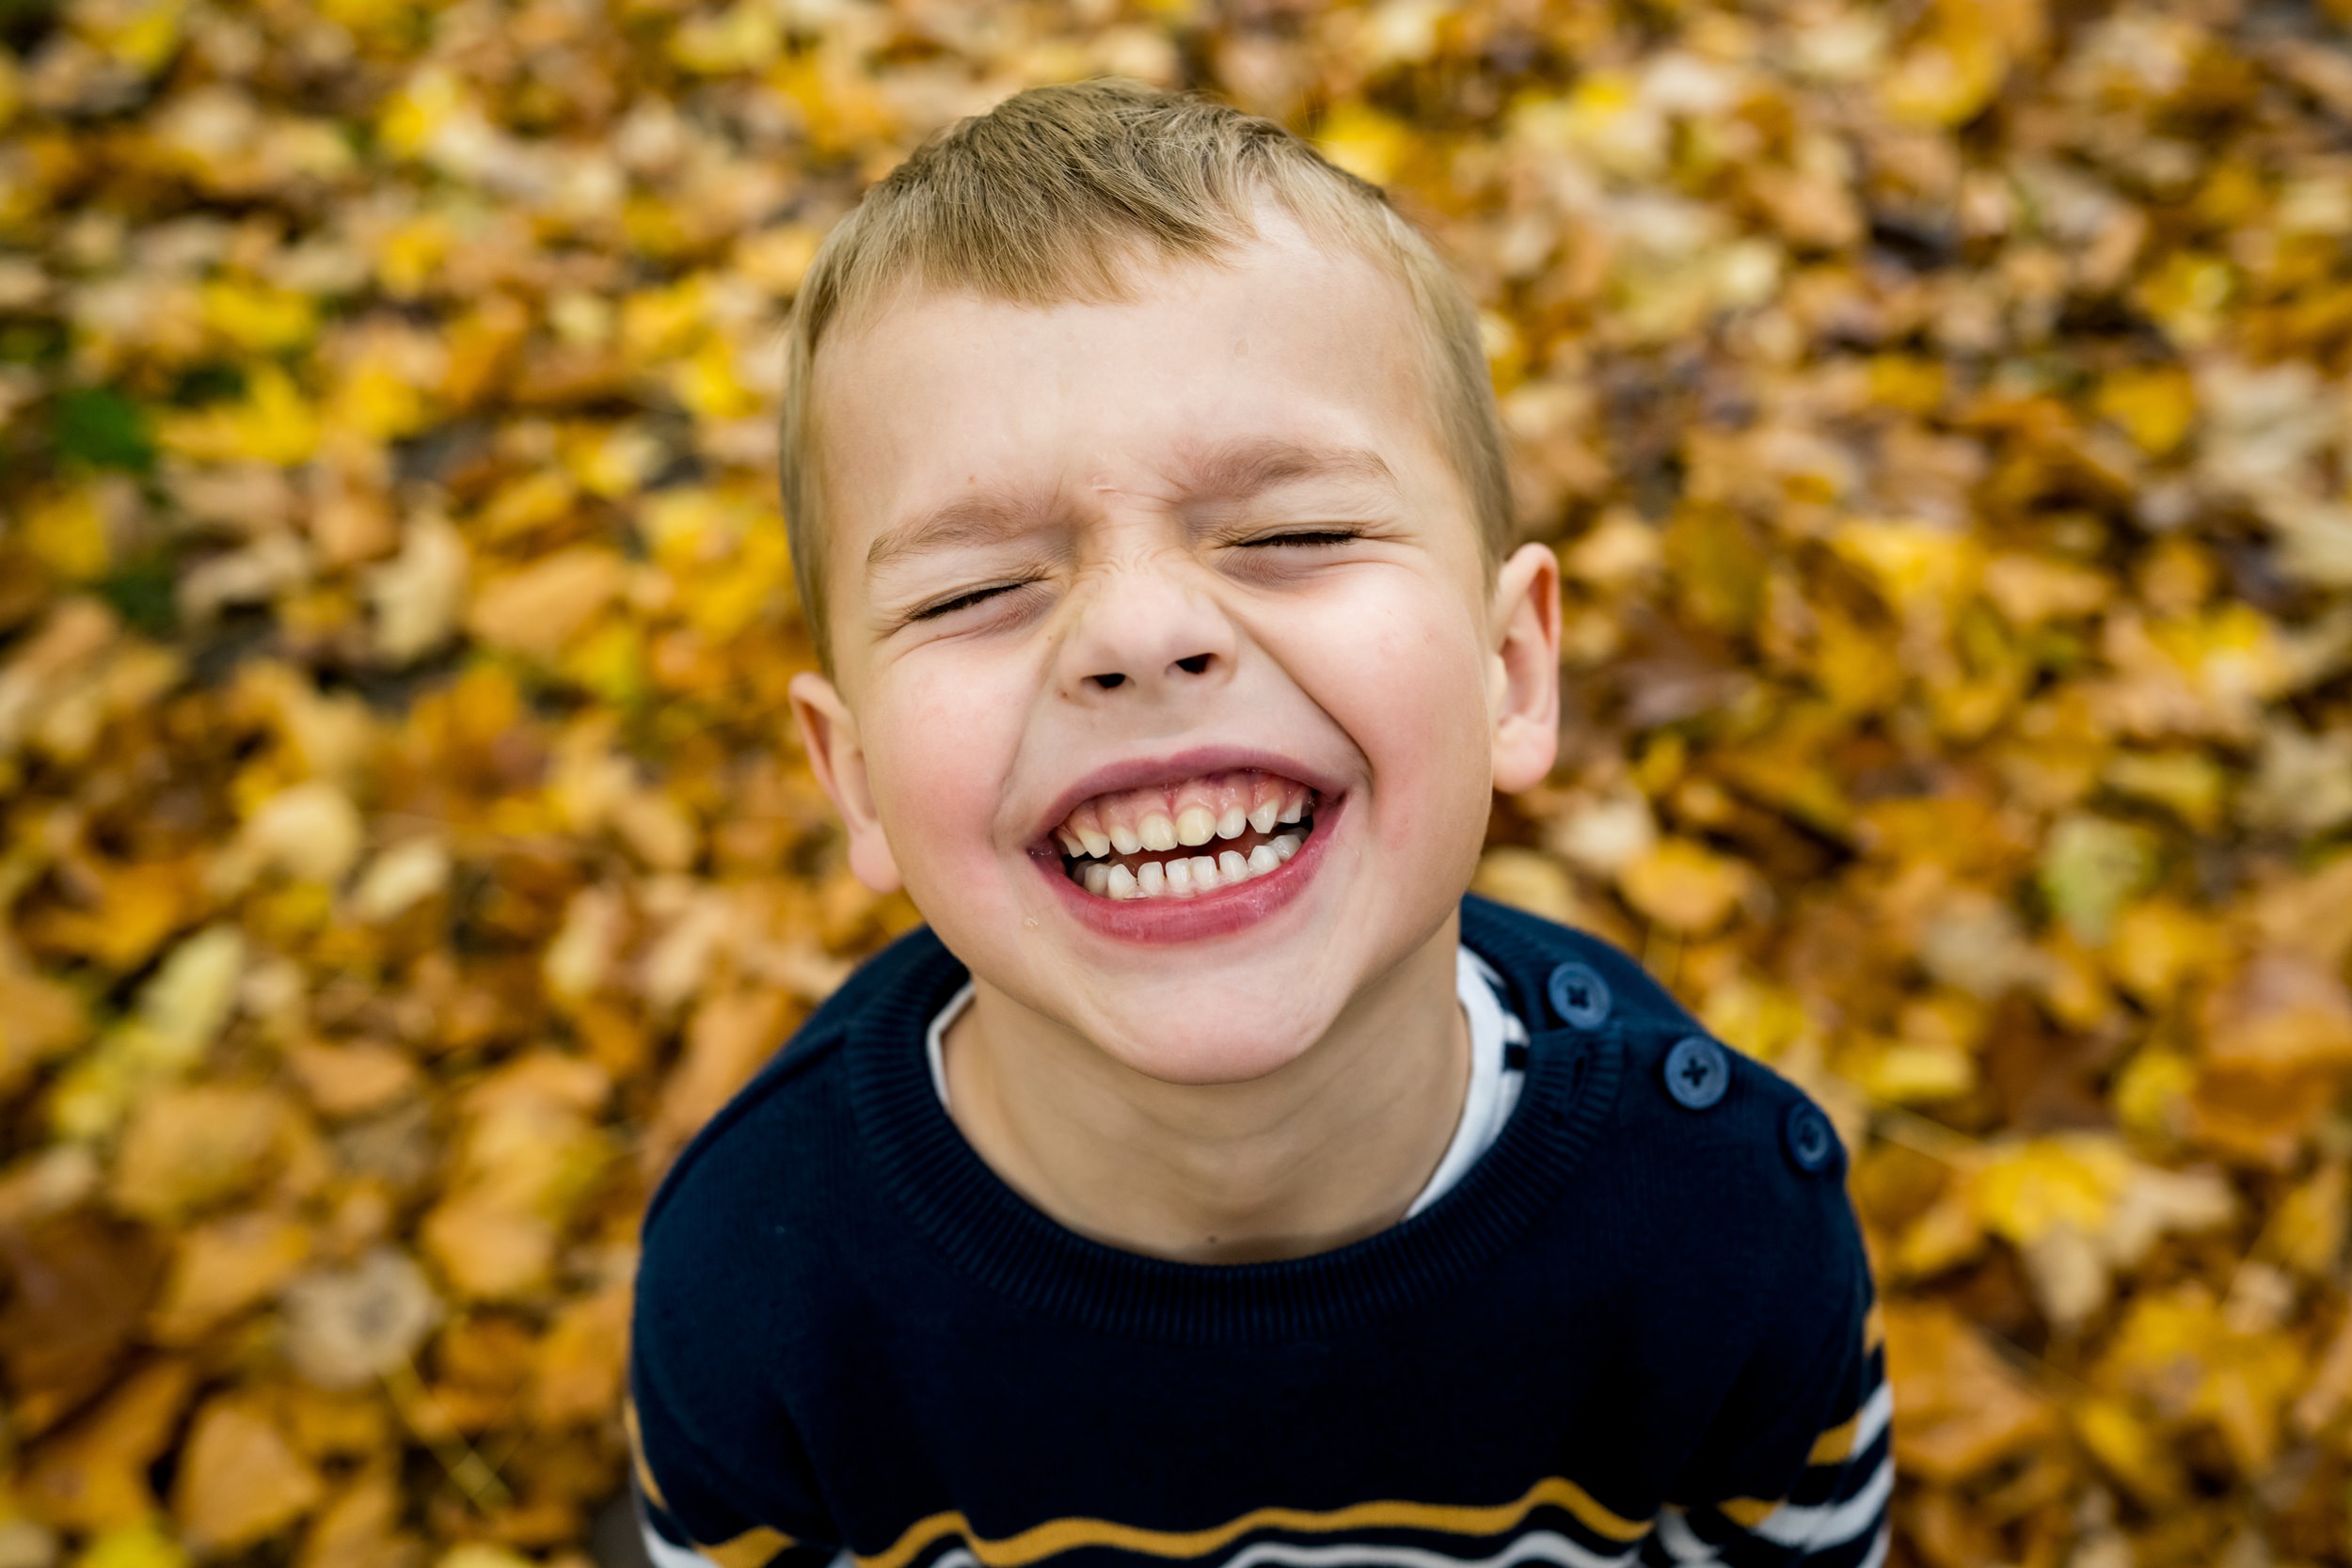 Little kid grins at the camera in autumn leaves